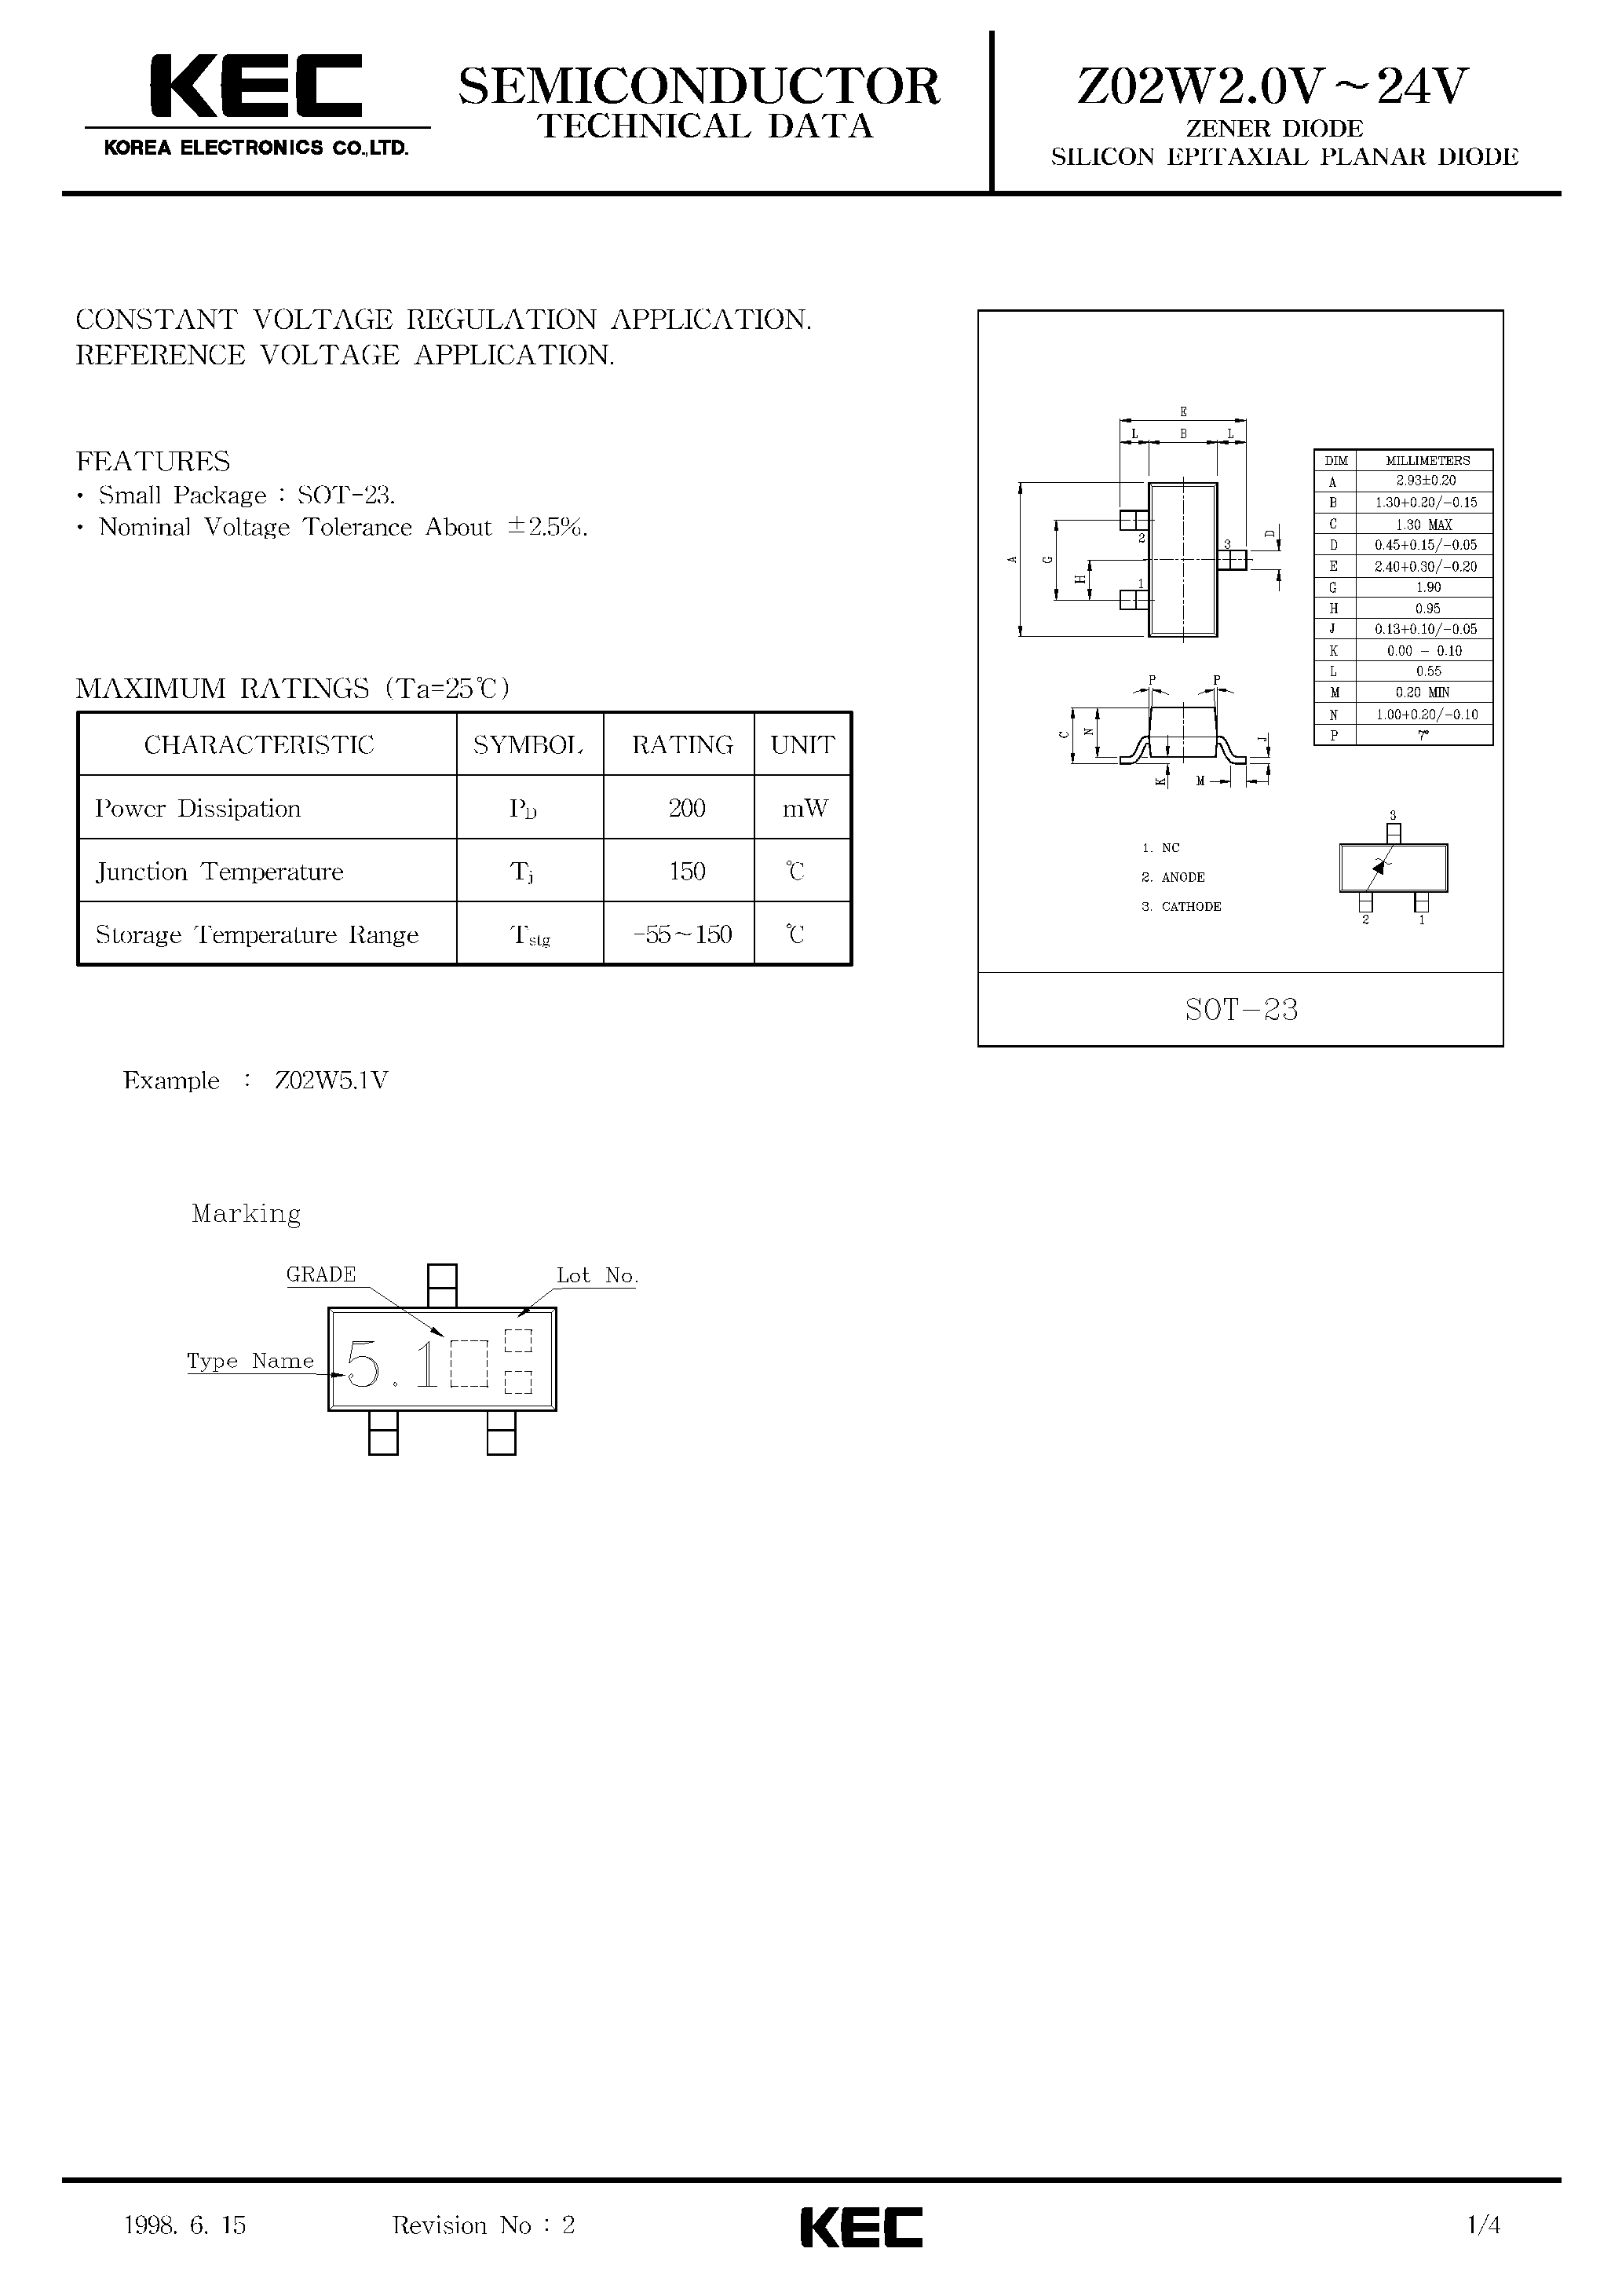 Datasheet Z02W2.2V - ZENER DIODE SILICON EPITAXIAL PLANAR DIODE page 1